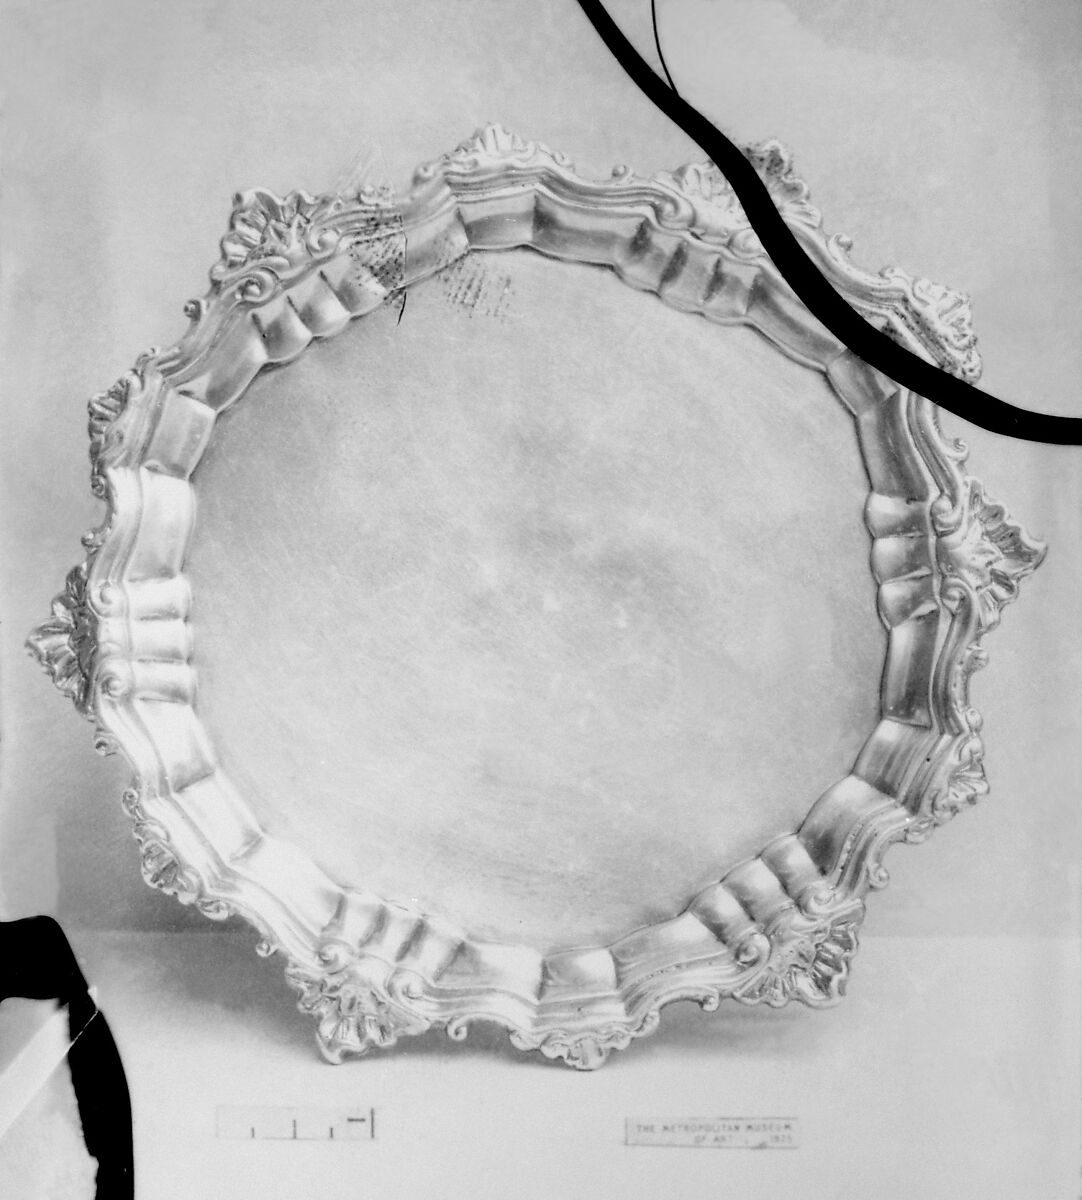 Salver, Possibly by William Homer (entered 1758, died 1773), Silver, Irish, Dublin 